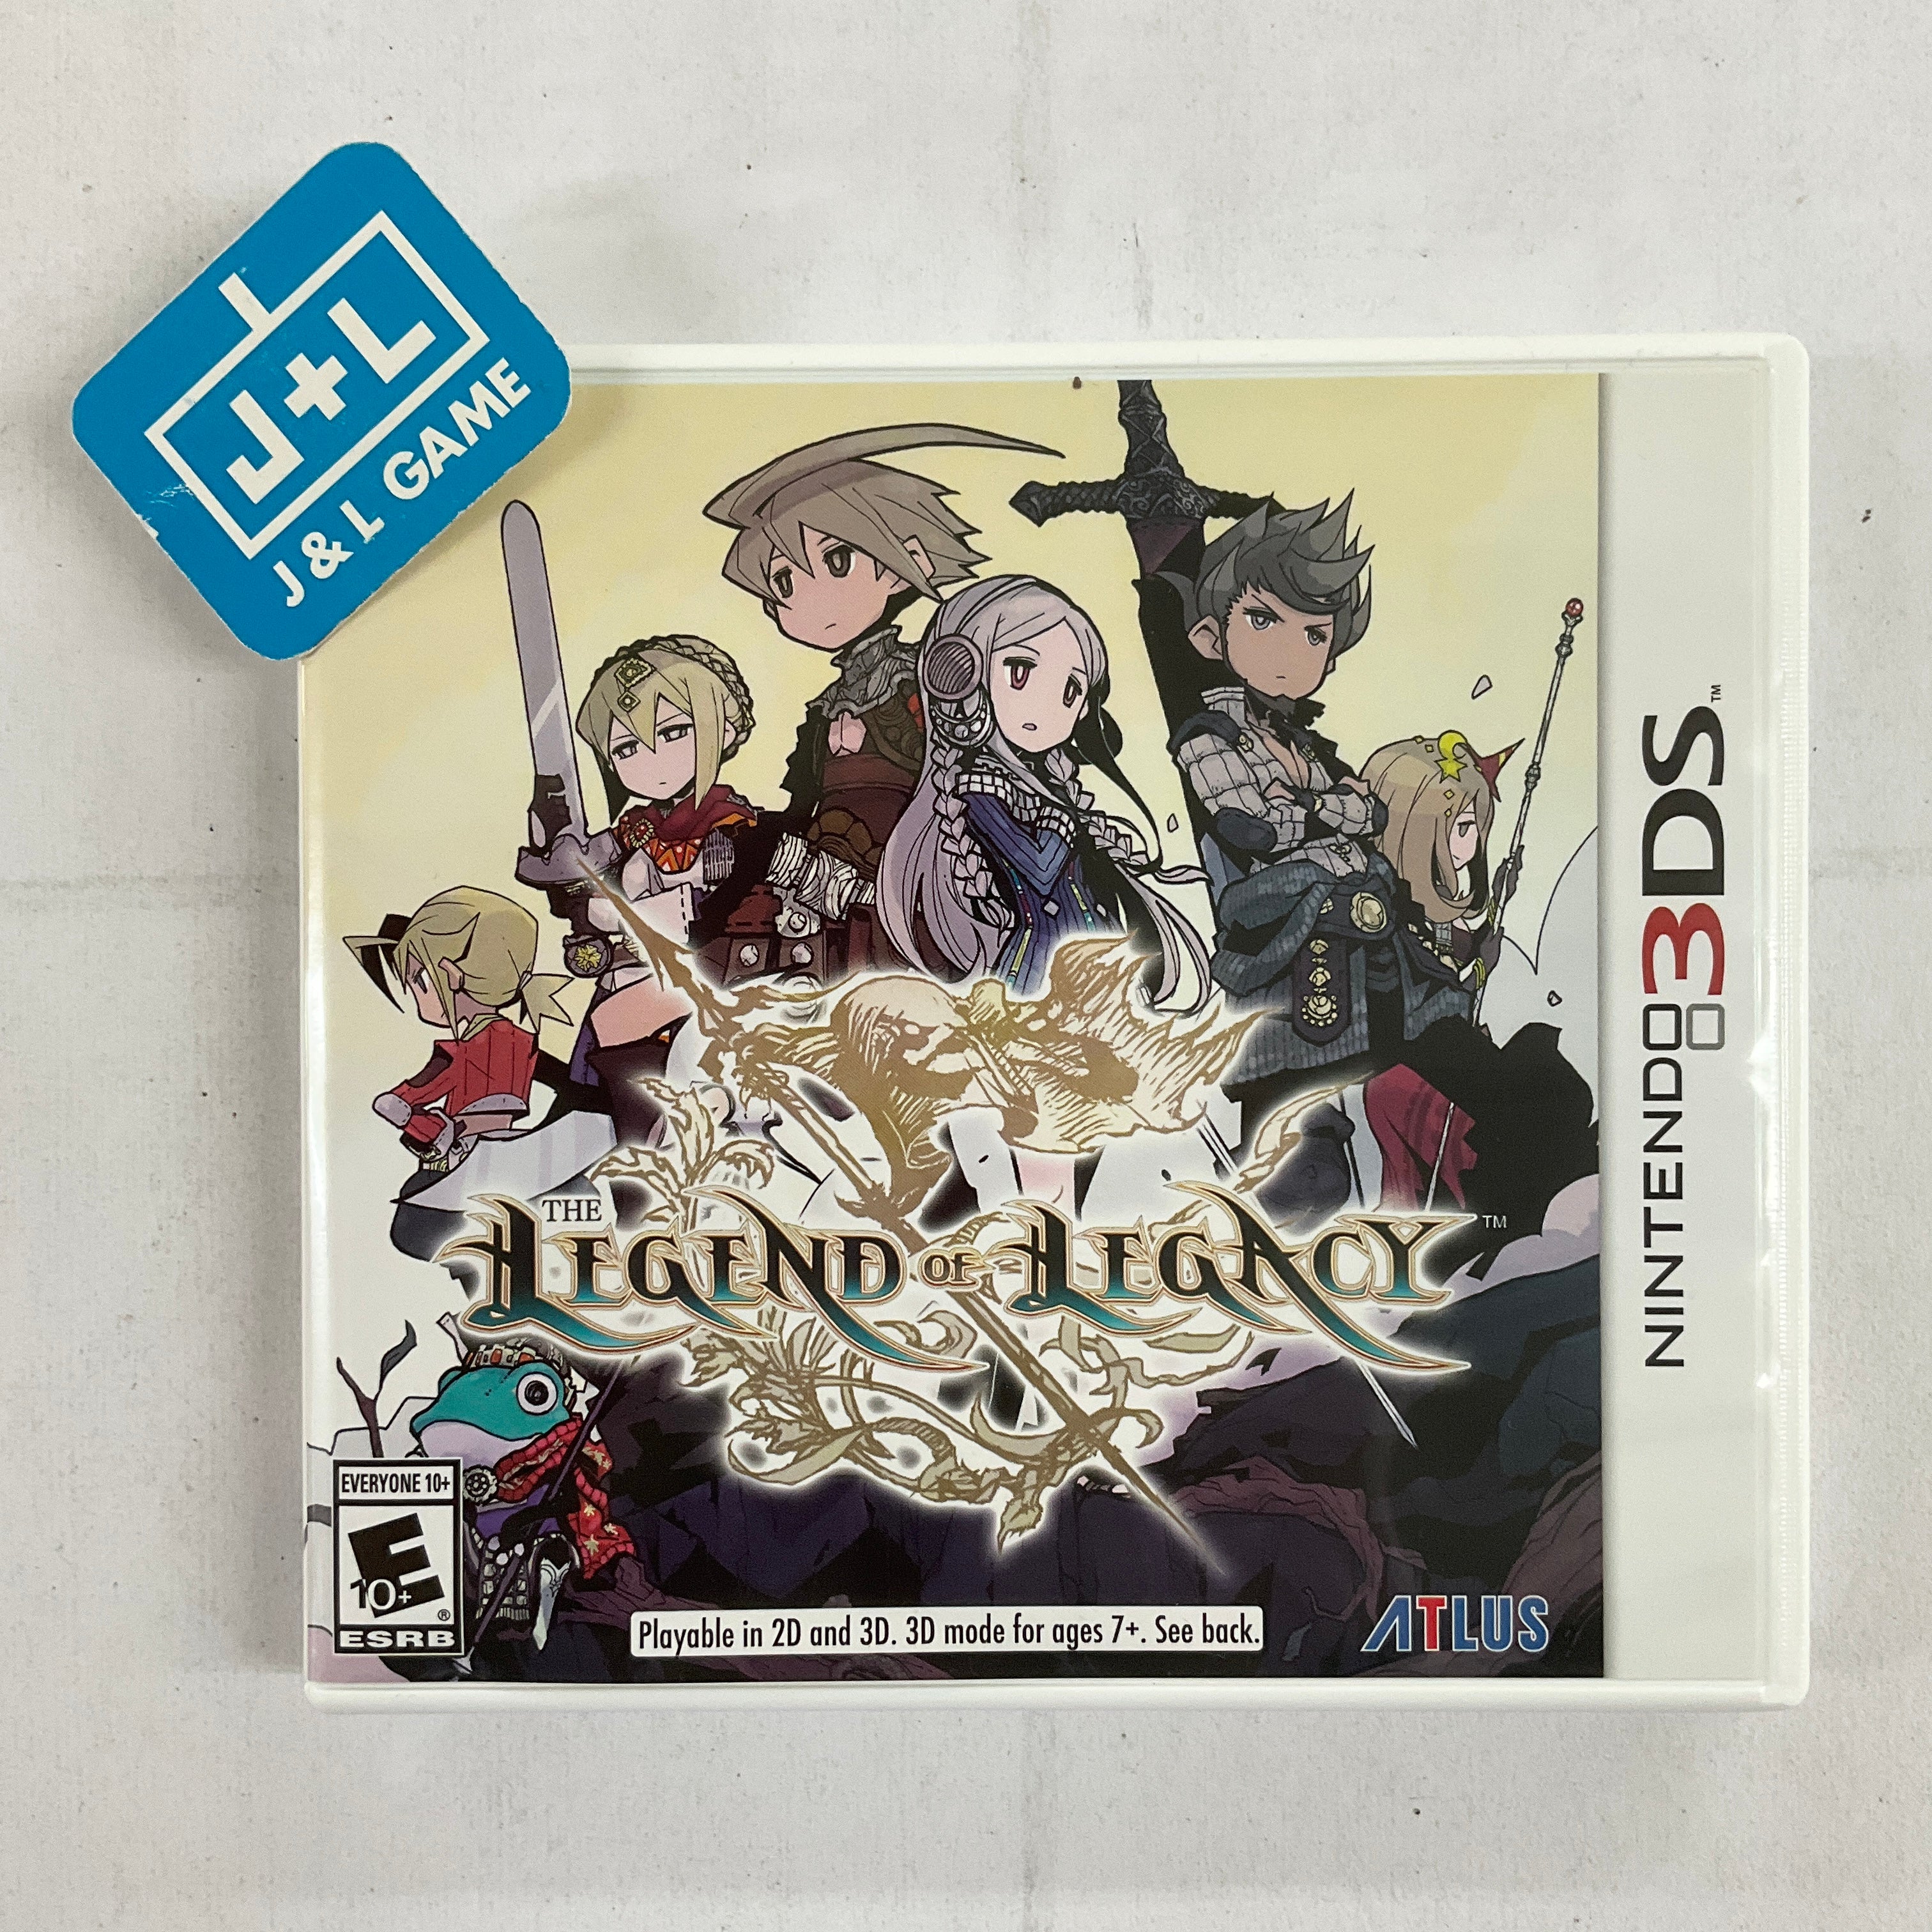 The Legend of Legacy (Launch Edition) - Nintendo 3DS [Pre-Owned] Video Games Atlus   